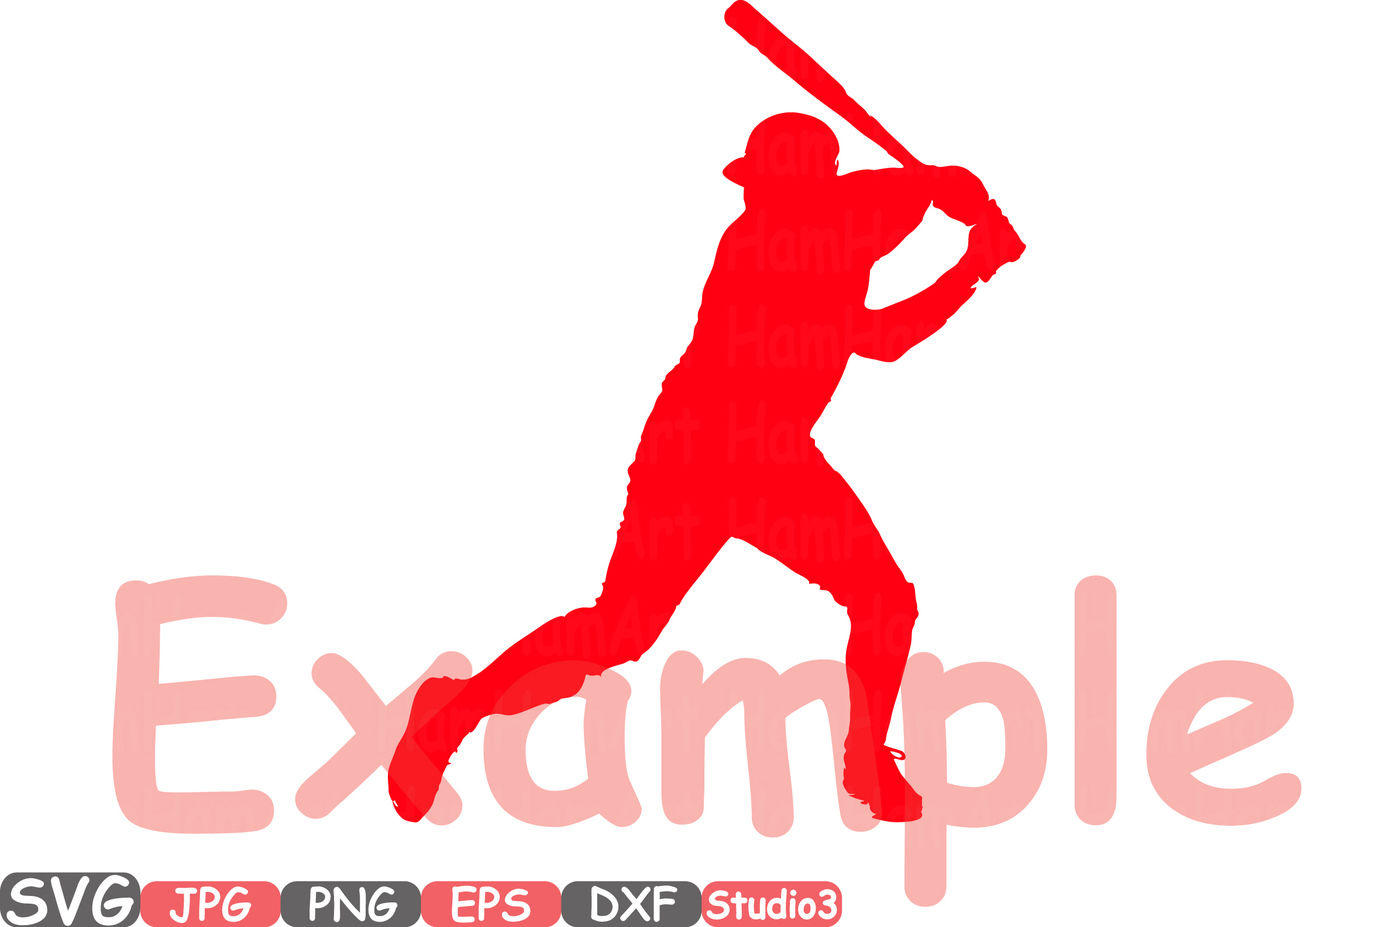 Baseball Player Silhouette - Free Clip Art, Printable, and Vector Downloads